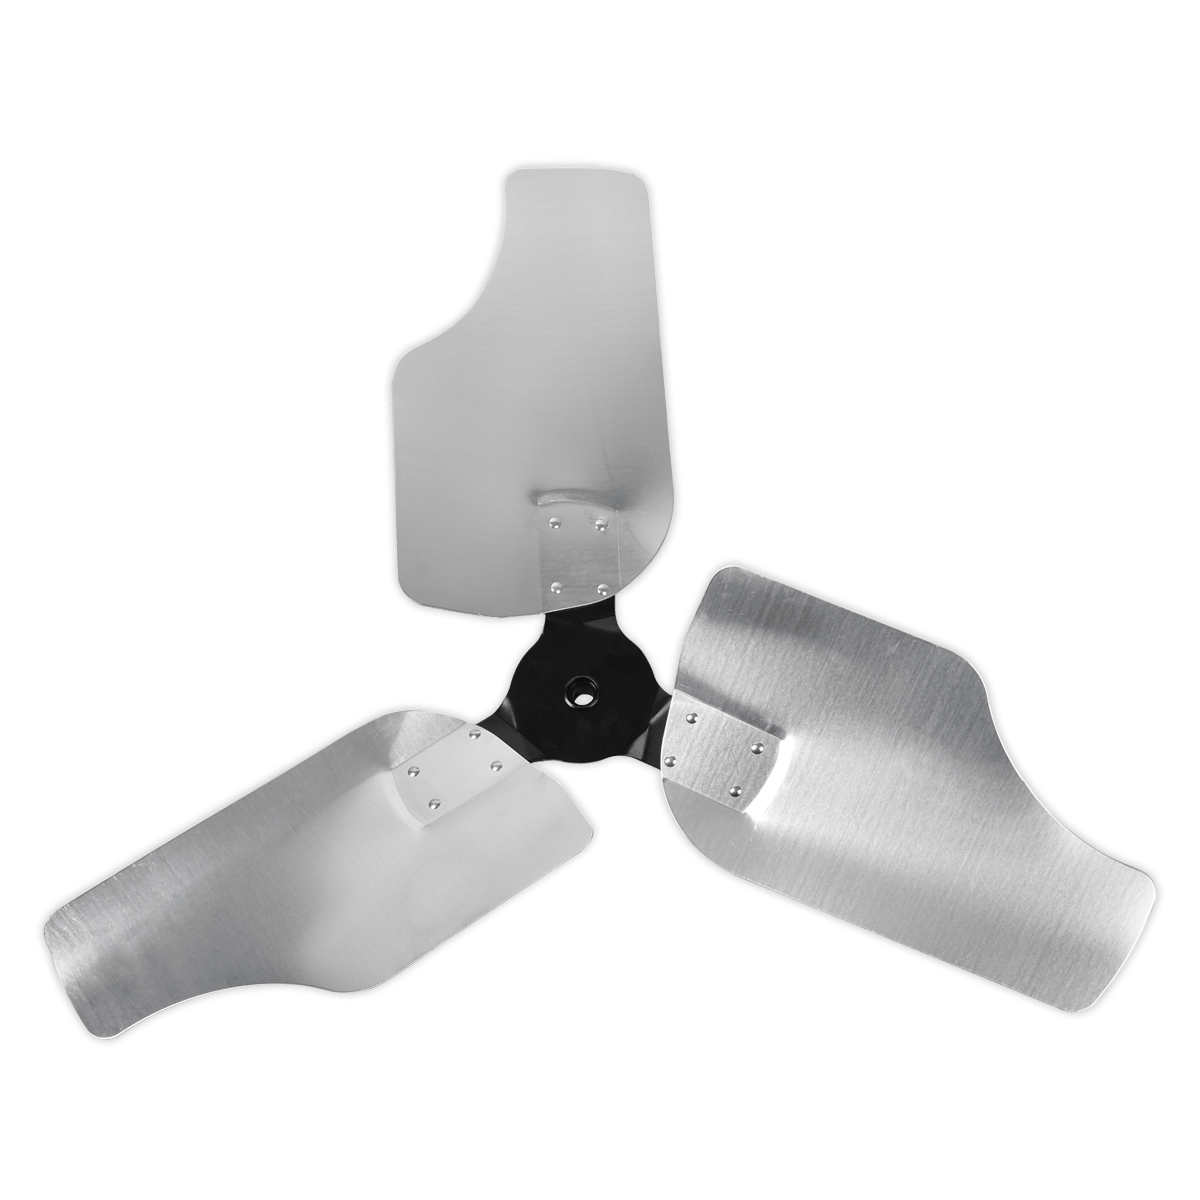 Industrial High Velocity Drum Fan 24" 230V - Premier | High efficiency industrial fans with improved motor and blade design resulting in higher velocity with up to 30% more area coverage and reach. | toolforce.ie